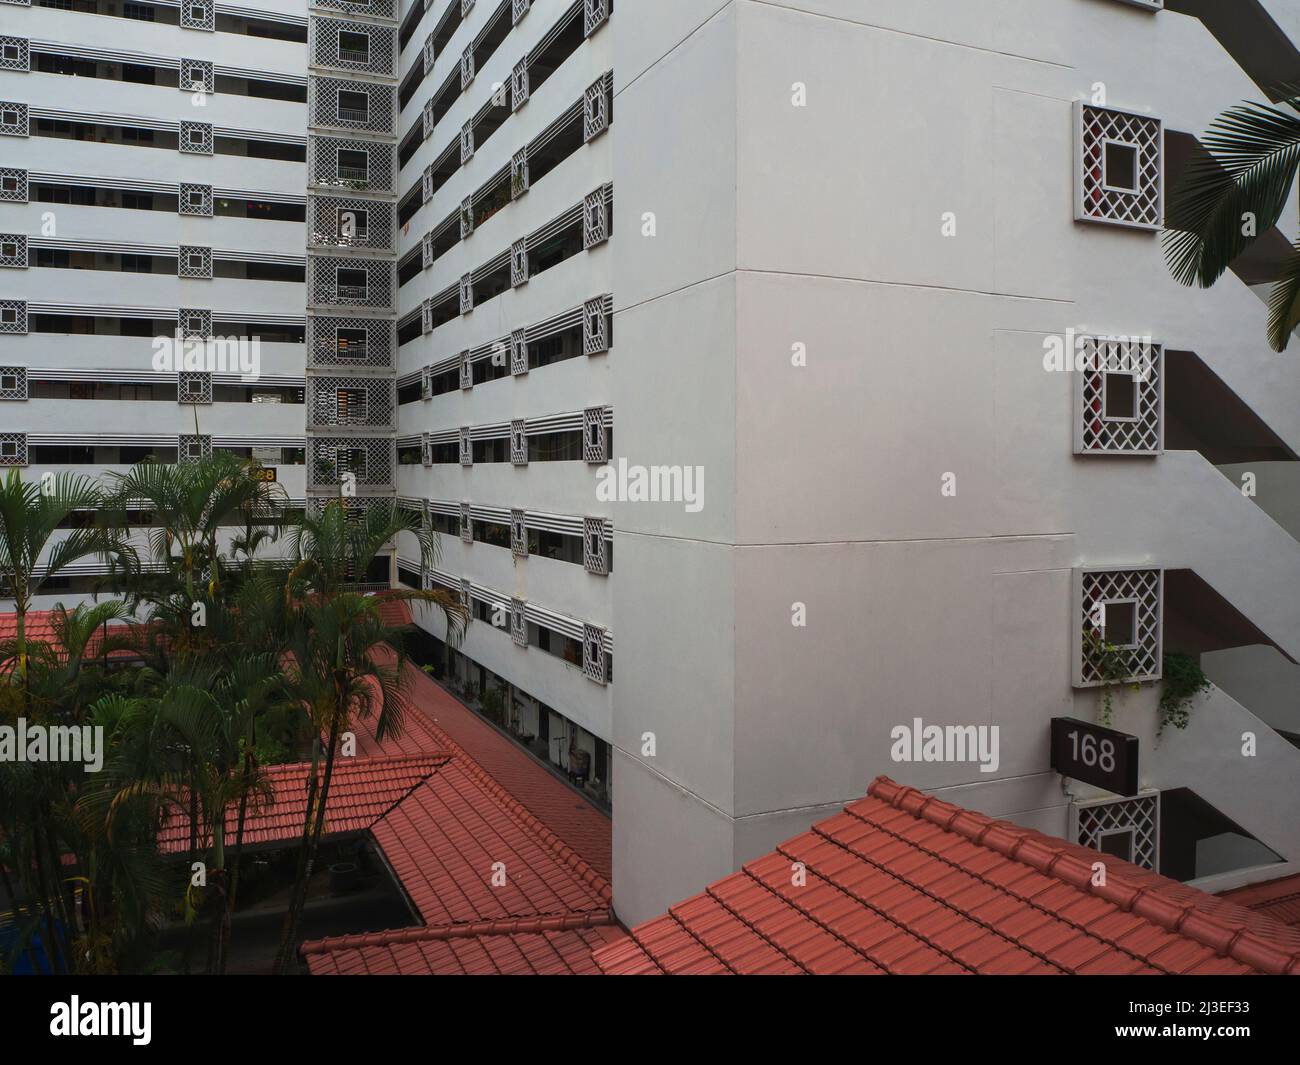 Close up view of exterior facade of an old HDB flat design in a residential neighbourhood. Stock Photo